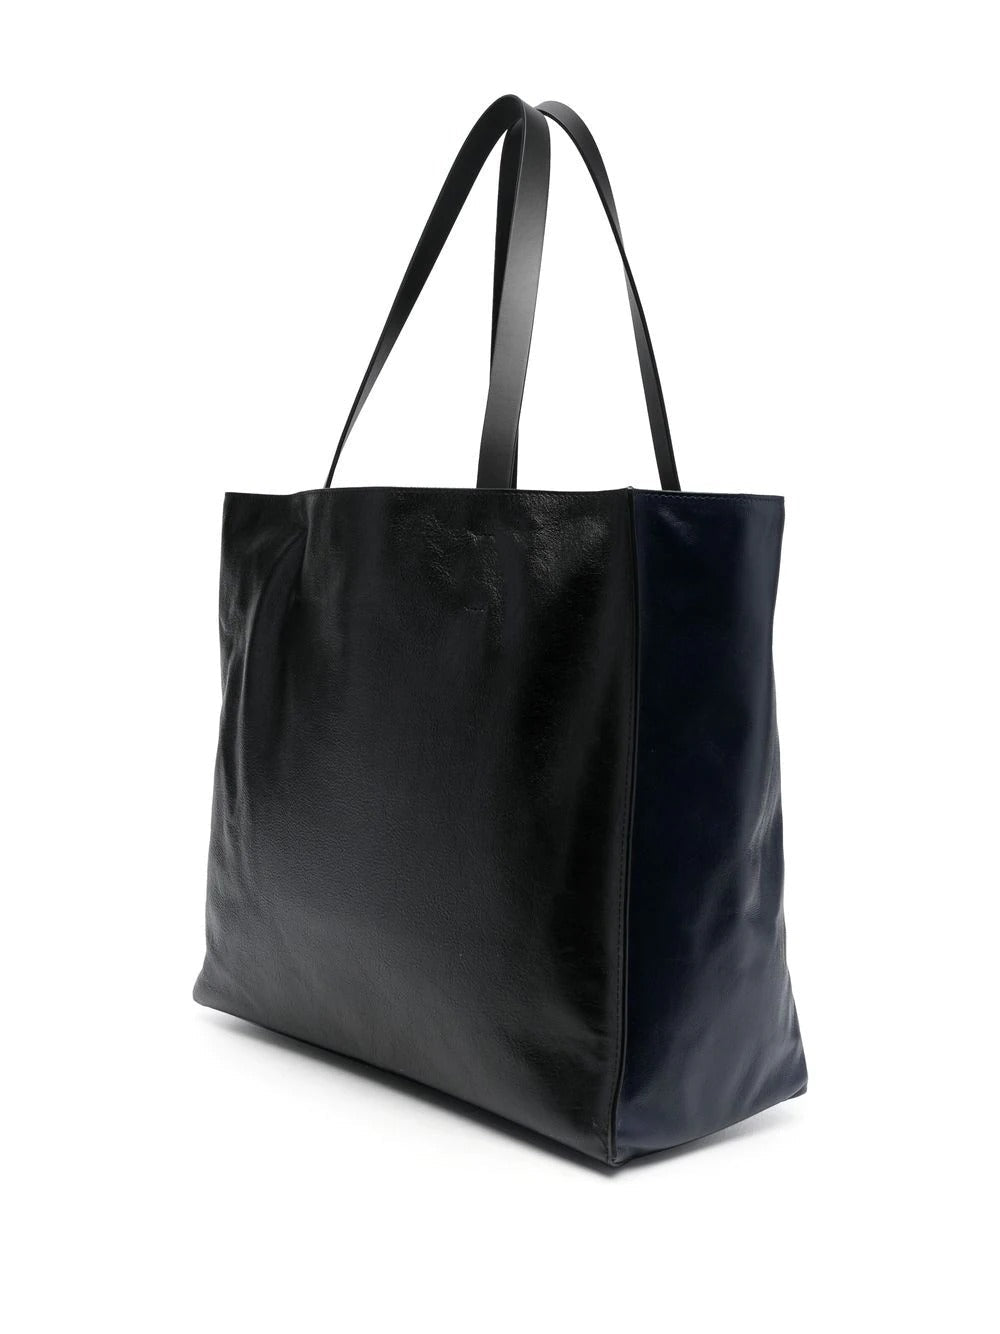 Marni-Mused-Soft-Calf-Leather-Tote-Navy-2